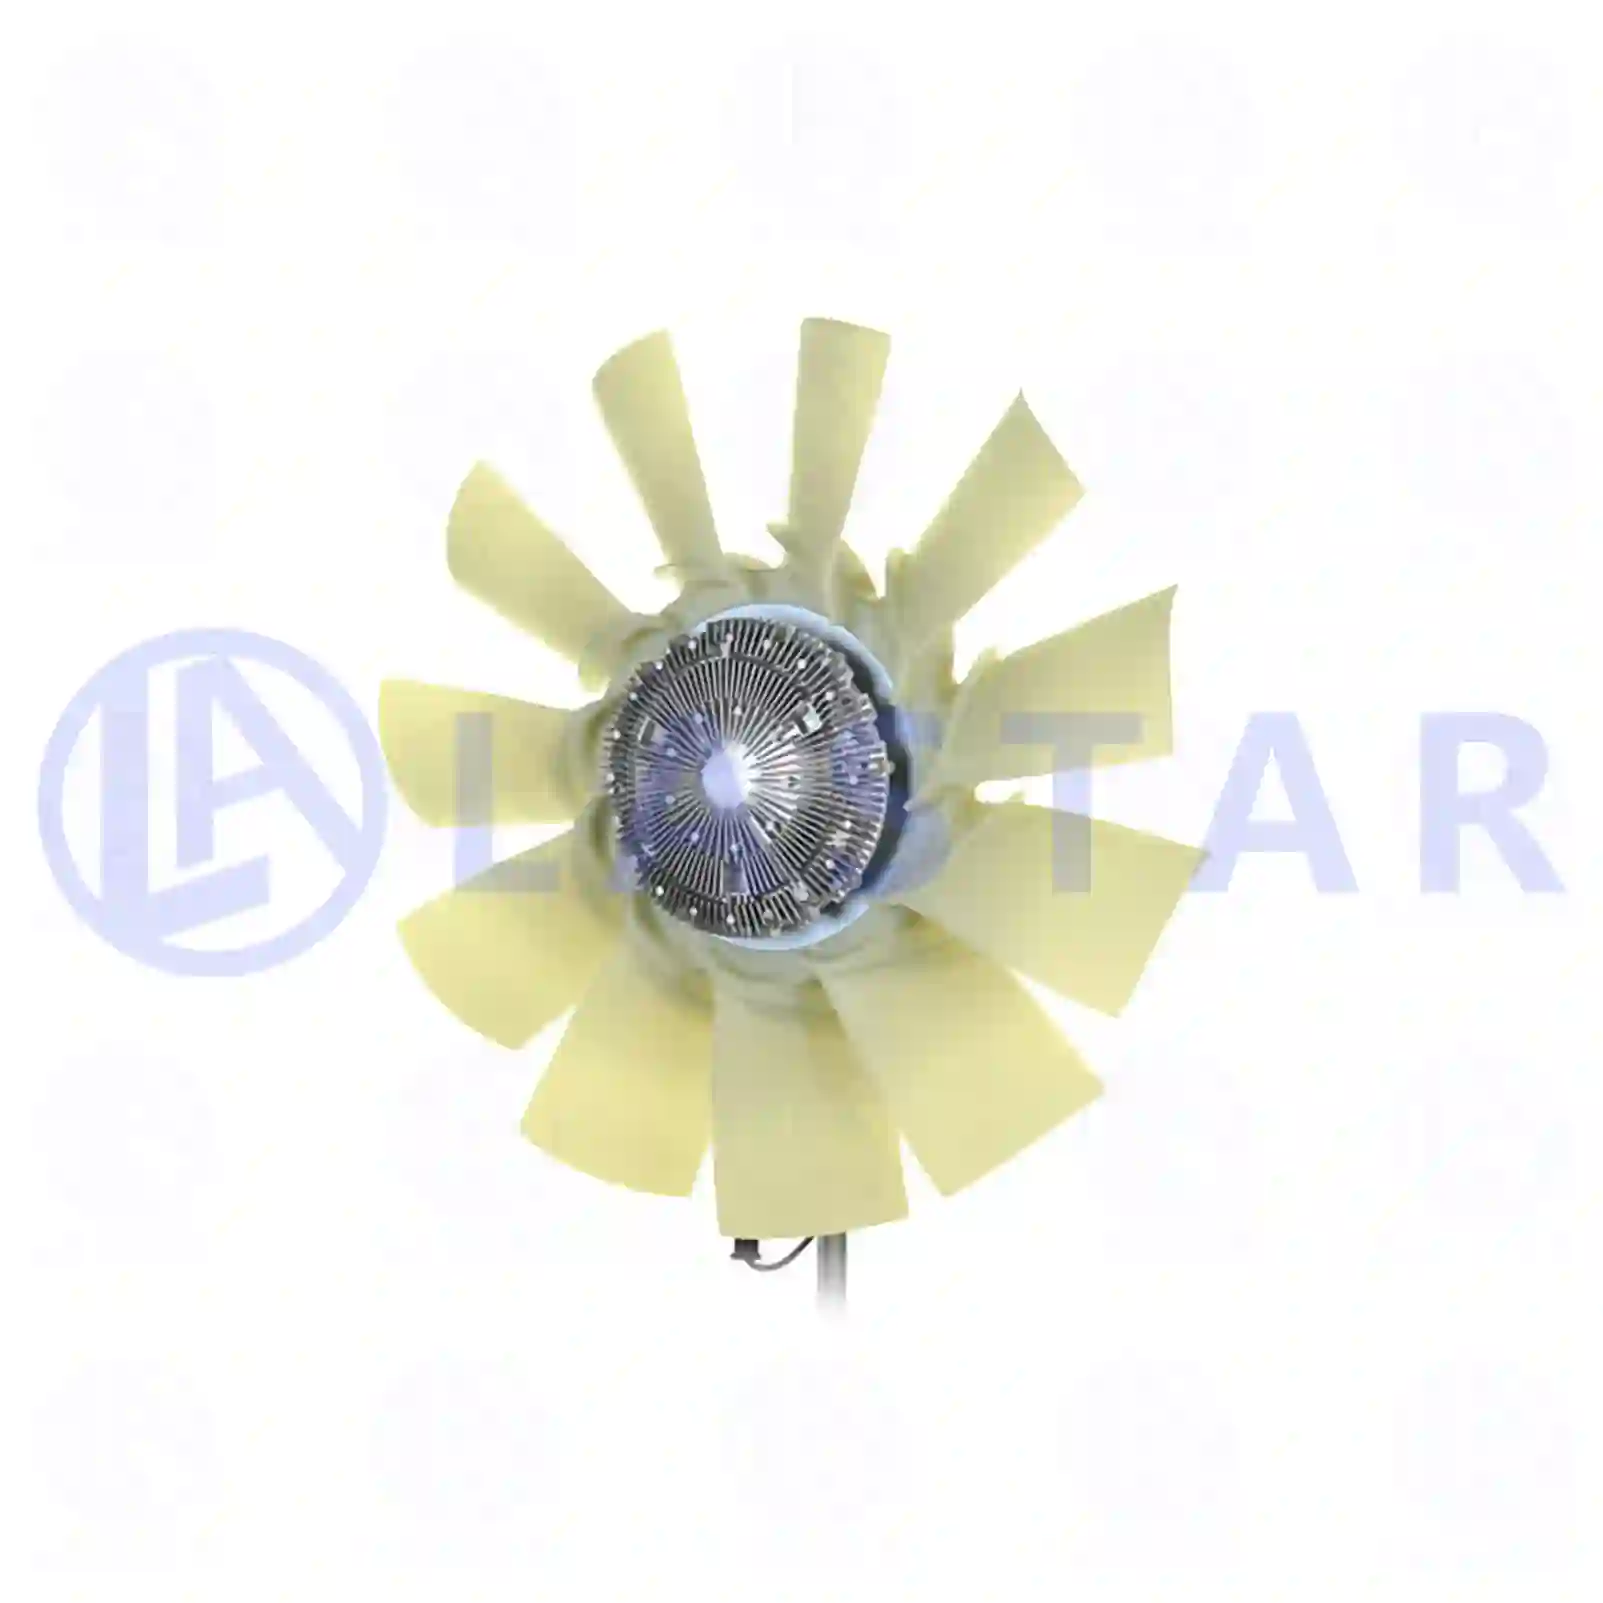 Fan with clutch, 77709785, 1520308, 1763618, 2052005, 2132264, 2410085, ZG00395-0008 ||  77709785 Lastar Spare Part | Truck Spare Parts, Auotomotive Spare Parts Fan with clutch, 77709785, 1520308, 1763618, 2052005, 2132264, 2410085, ZG00395-0008 ||  77709785 Lastar Spare Part | Truck Spare Parts, Auotomotive Spare Parts